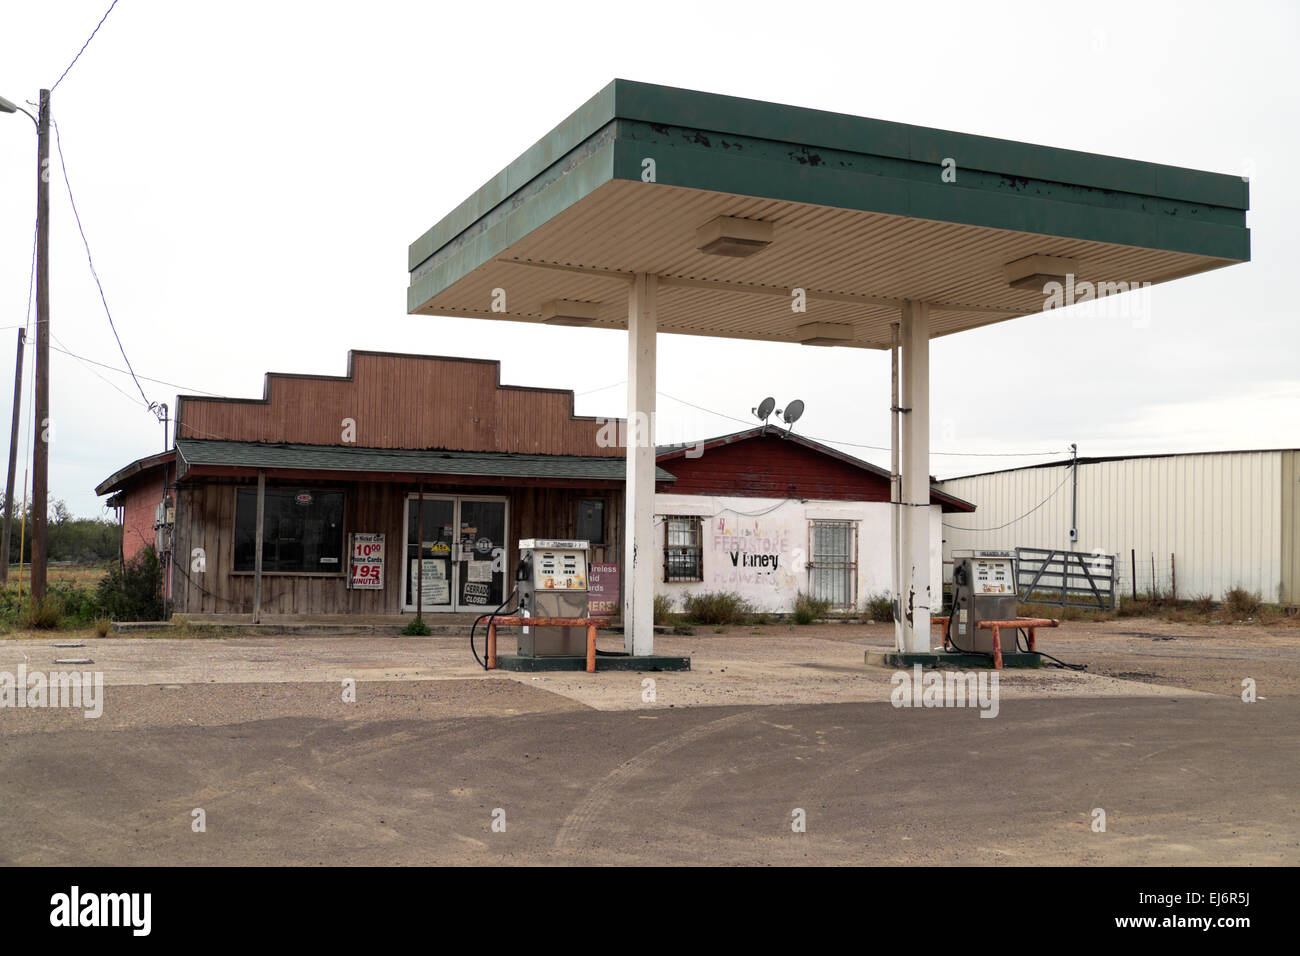 Abandoned gas station and convenience store in Texas, USA Stock Photo